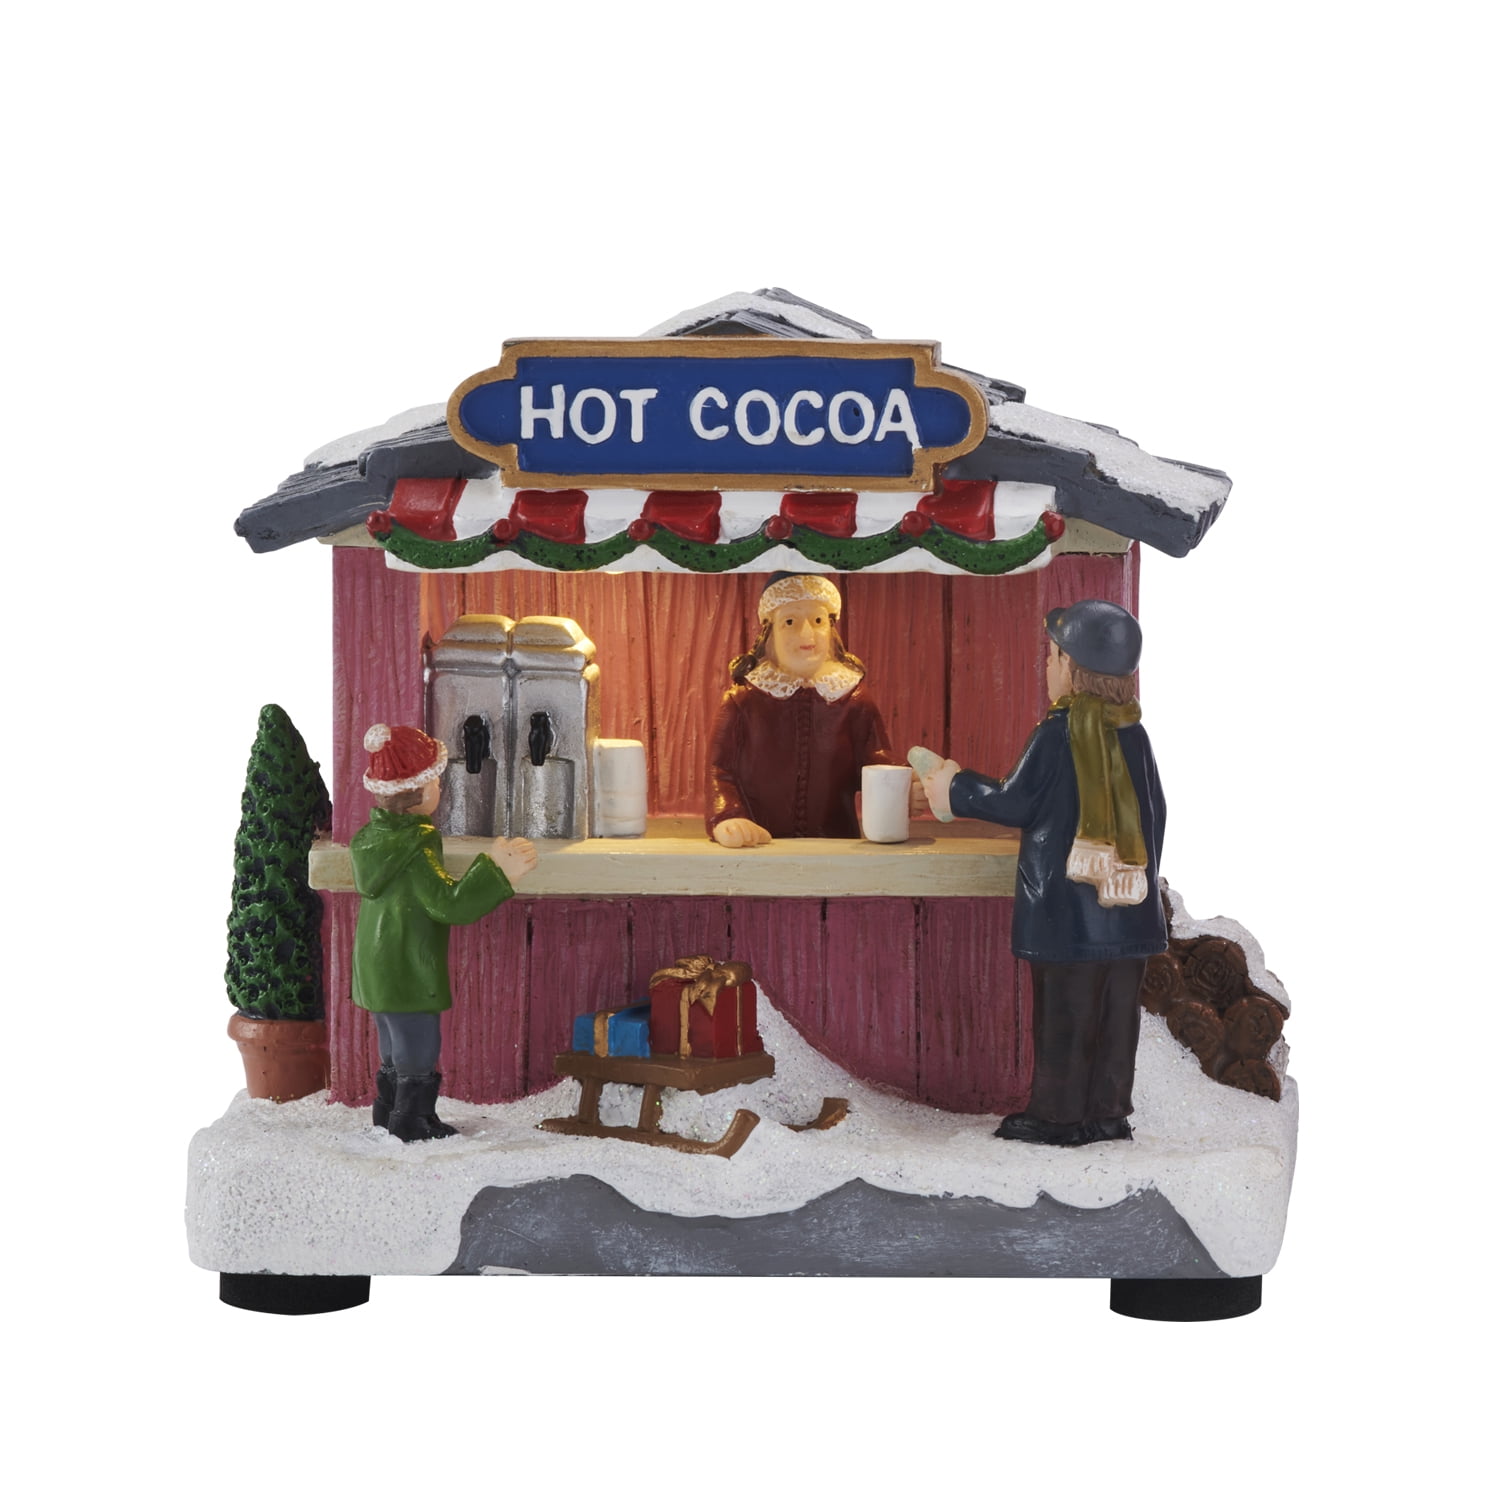 Holiday Time 3.9"H Christmas Village Food Stand Street Vendor, Hot Cocoa Stand with LED Lights - Battery Operated (not included) (3.9"H x 4.5"W x 3"D)